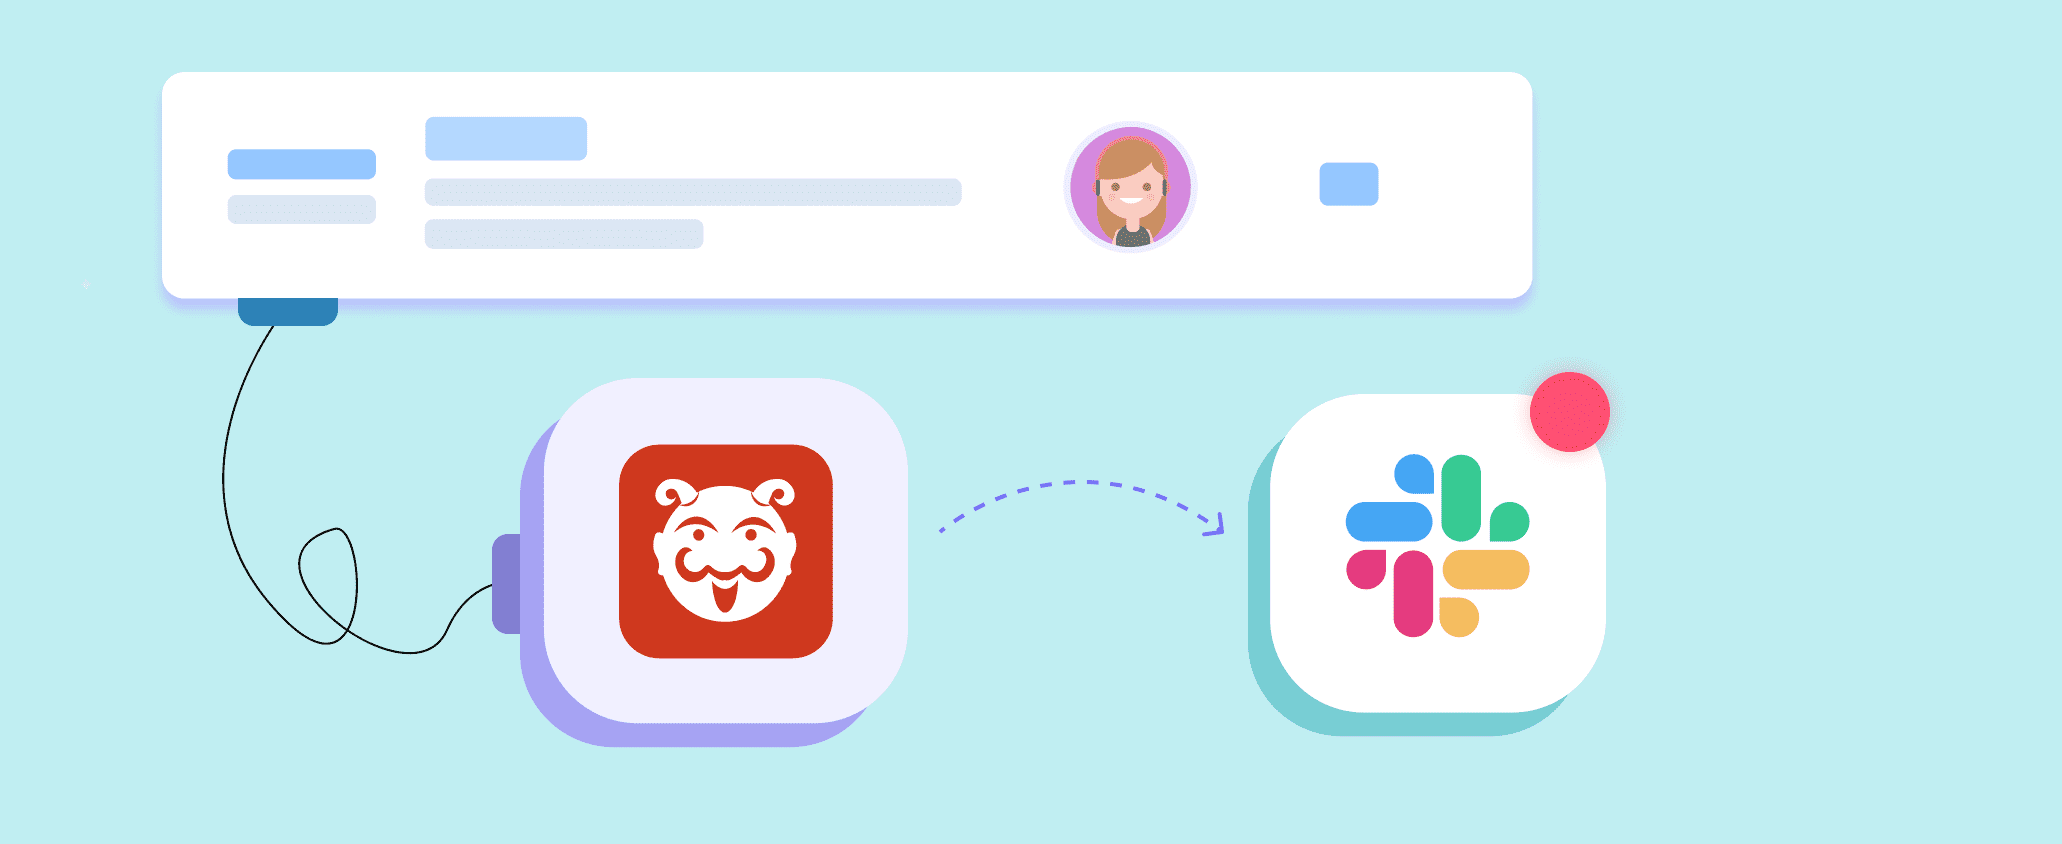 Get notified about your Bugasura issues on Slack!